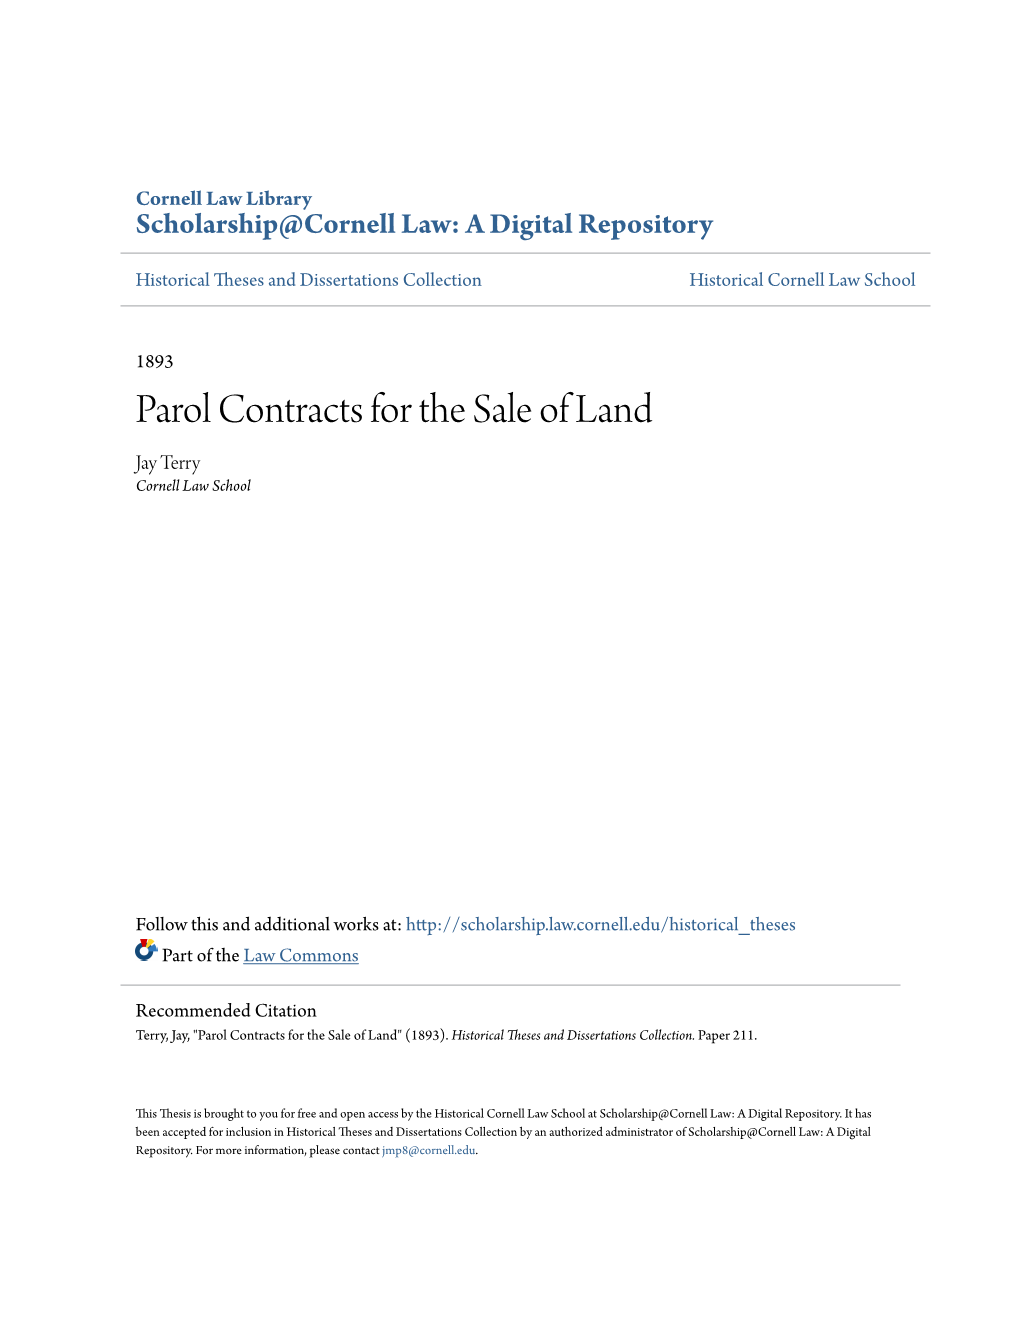 Parol Contracts for the Sale of Land Jay Terry Cornell Law School